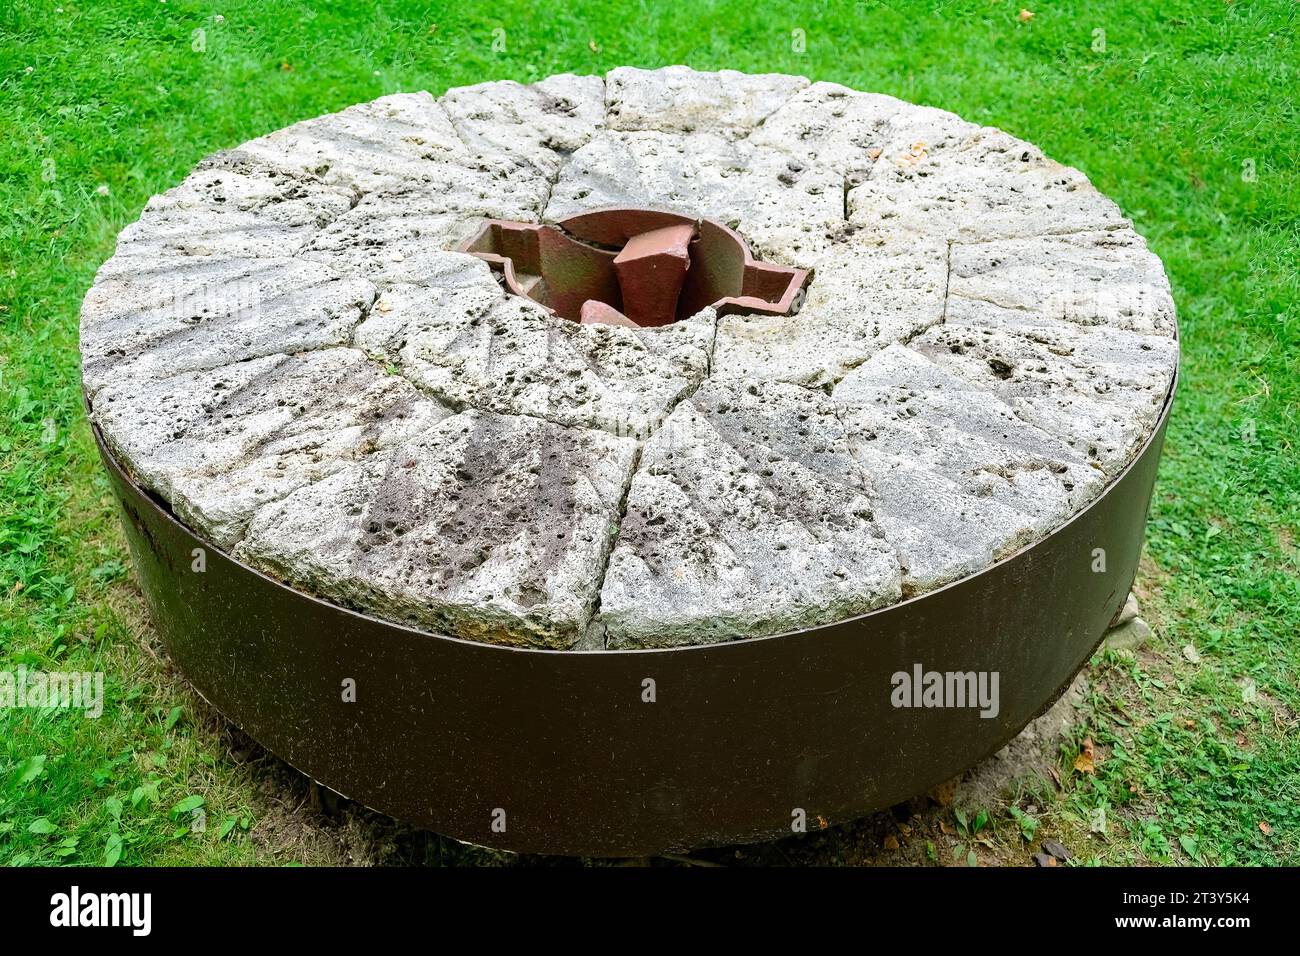 https://c8.alamy.com/comp/2T3Y5K4/toronto-canada-an-ancient-stone-and-metal-grinding-wheel-laying-on-the-ground-the-old-object-belonged-to-a-former-mill-from-colonial-times-photo-2T3Y5K4.jpg